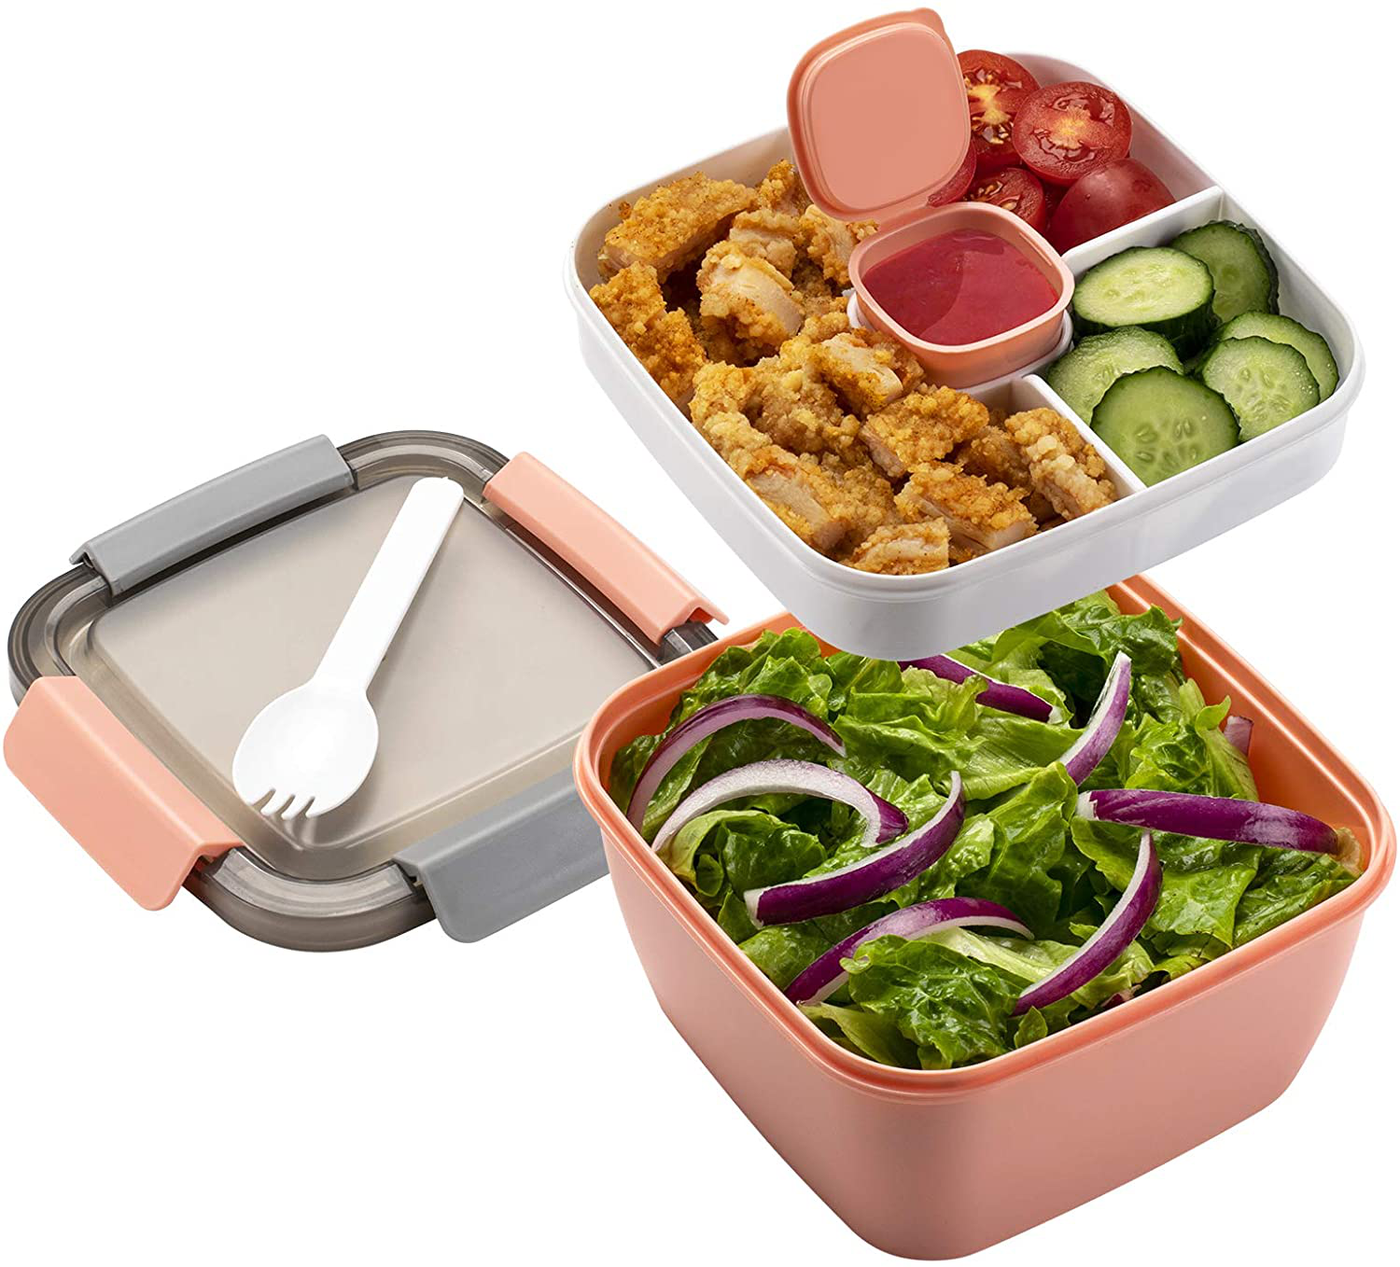 Freshmage Salad Lunch Container To Go, 52-oz Salad Bowls with 3 Compartments, Salad Dressings Container for Salad Toppings, Snacks, Men, Women (Purple)